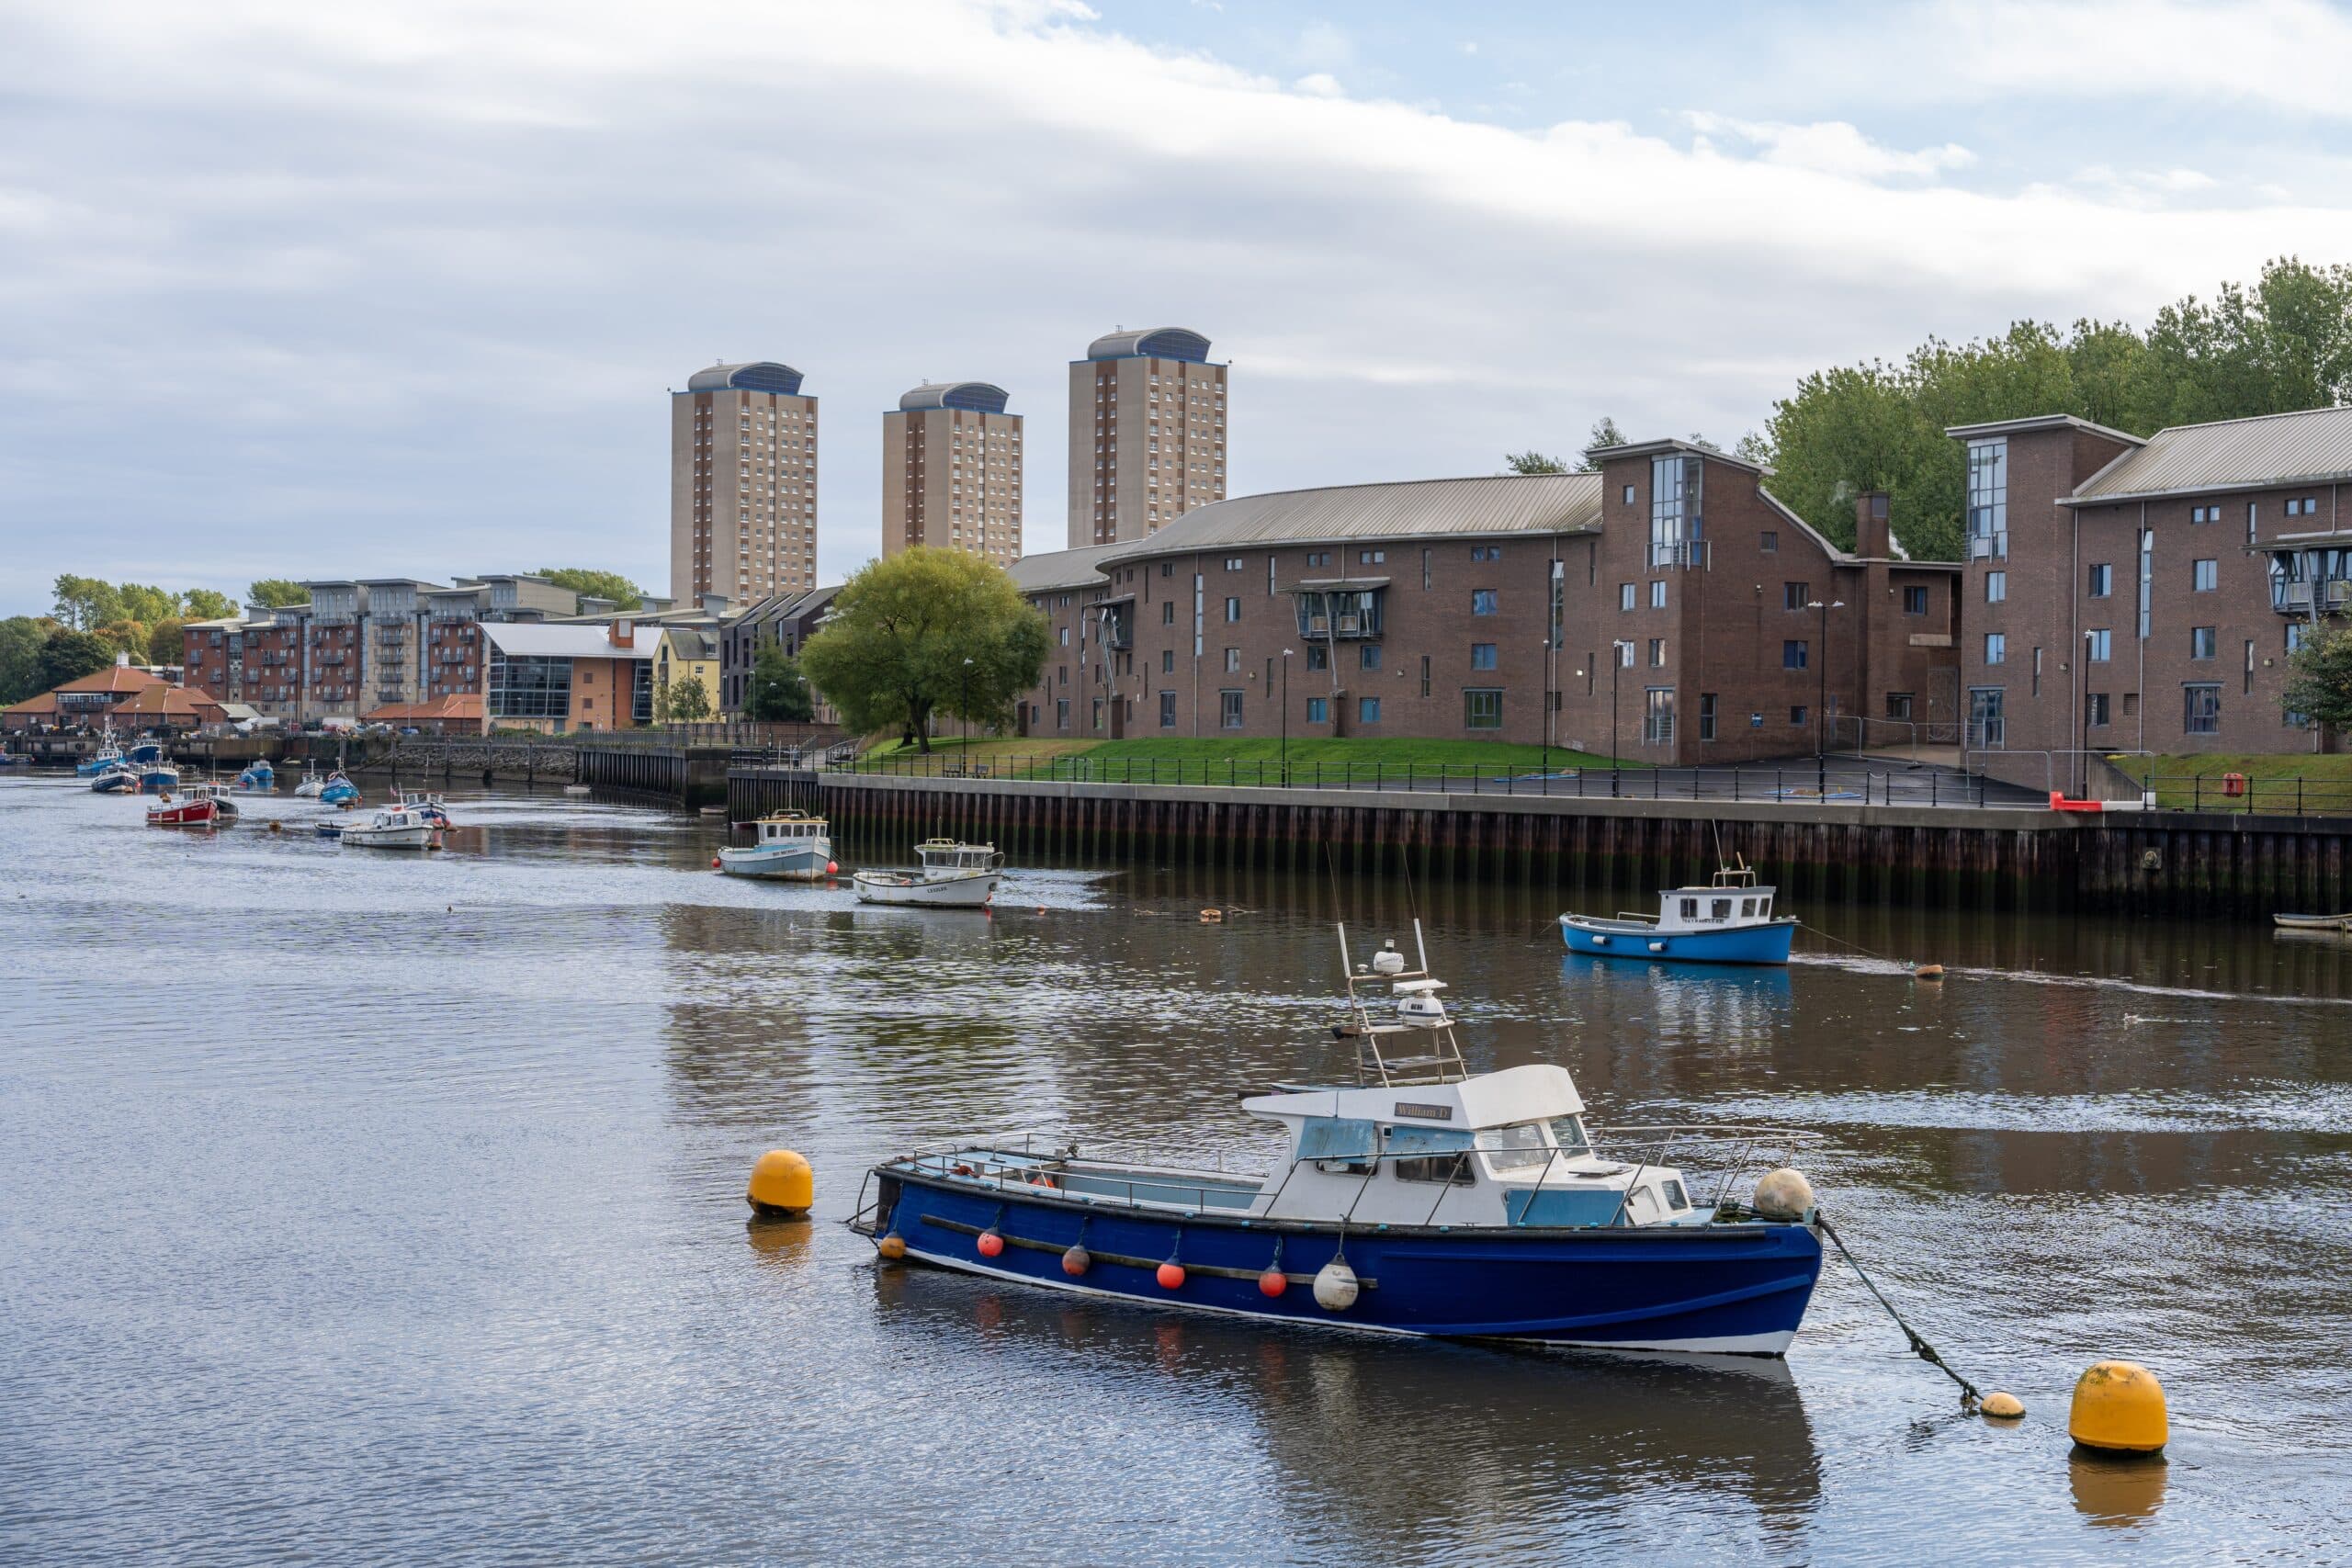 Sunderland Named One of the UK’s Best Places to Raise a Family